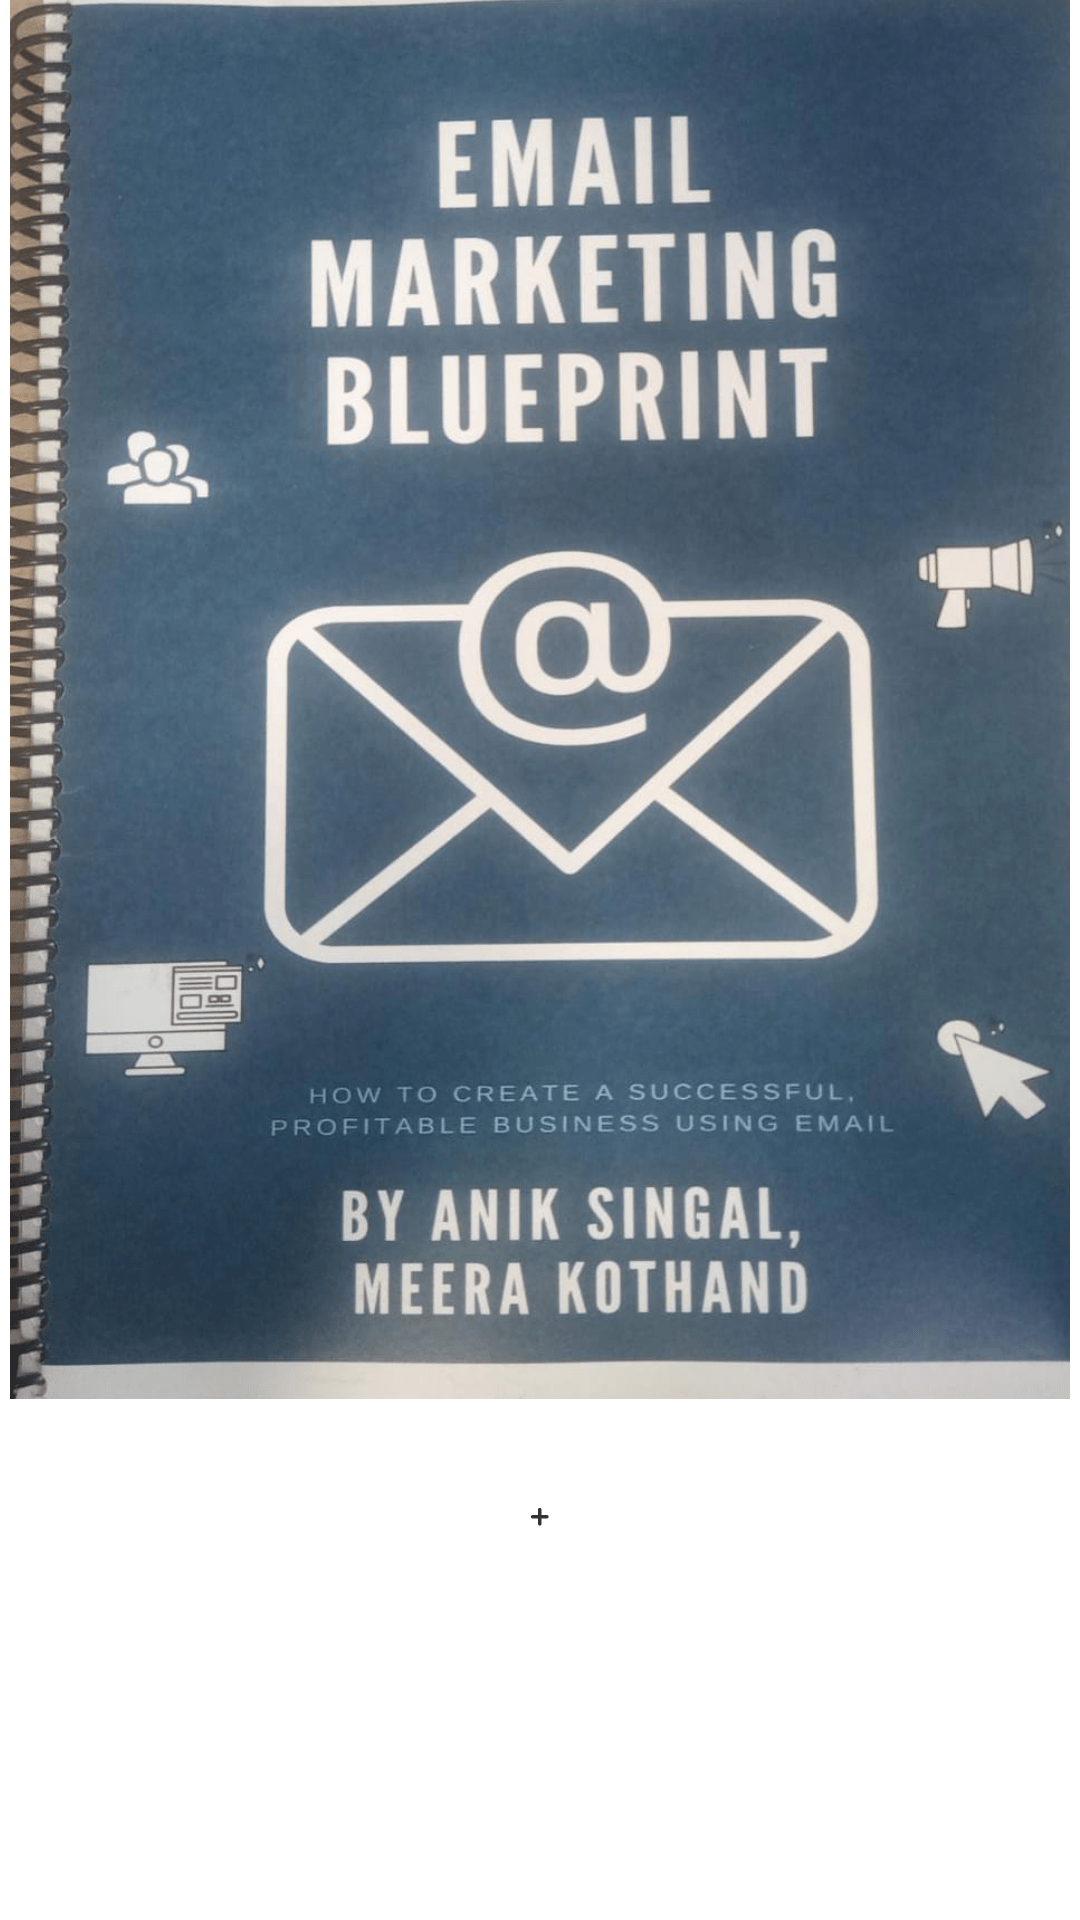 Email Marketing Blueprint: How to Creat a Successful, Profitable Business using Email